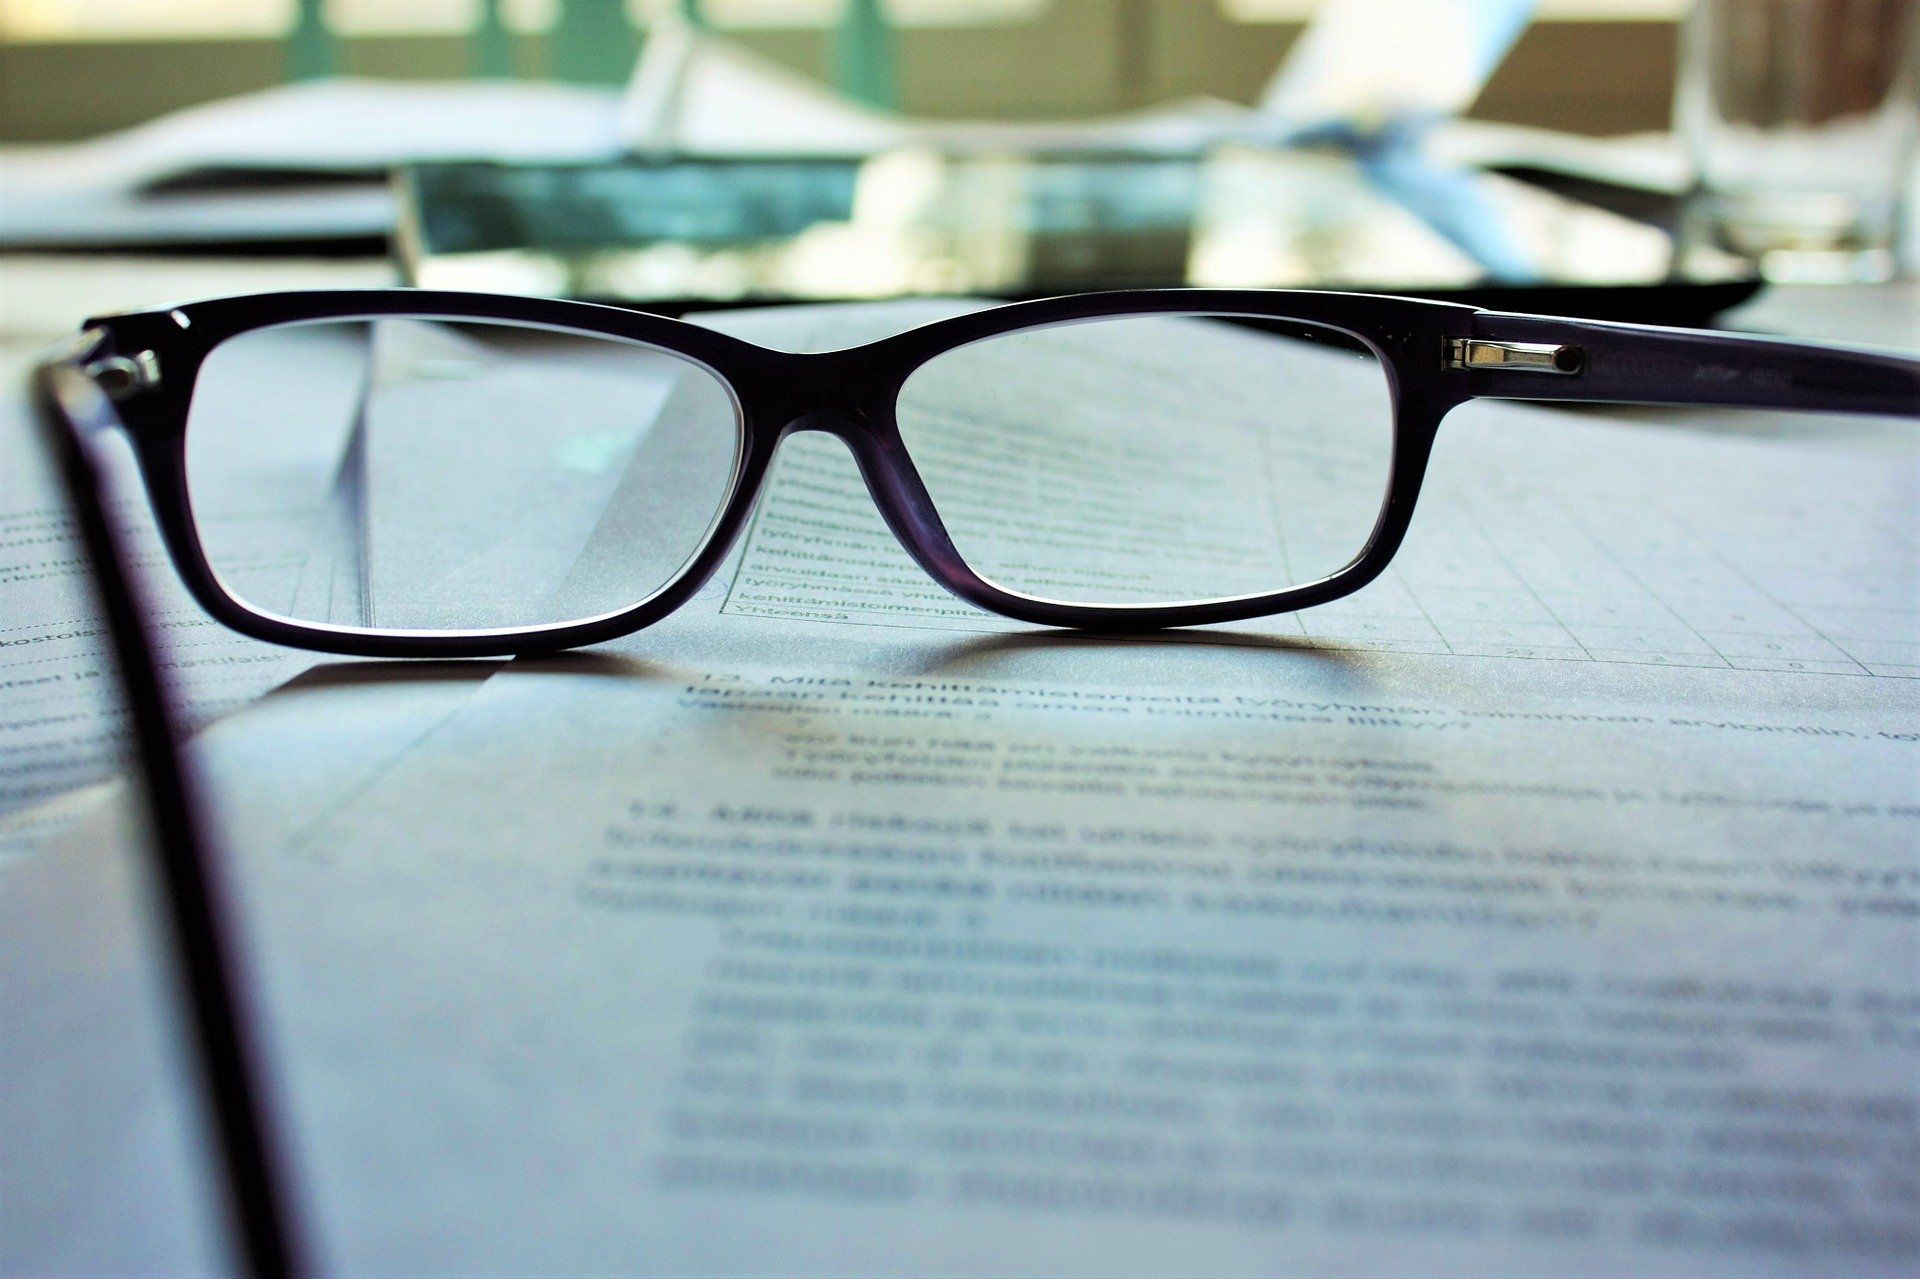 Glasses lying on a policy document